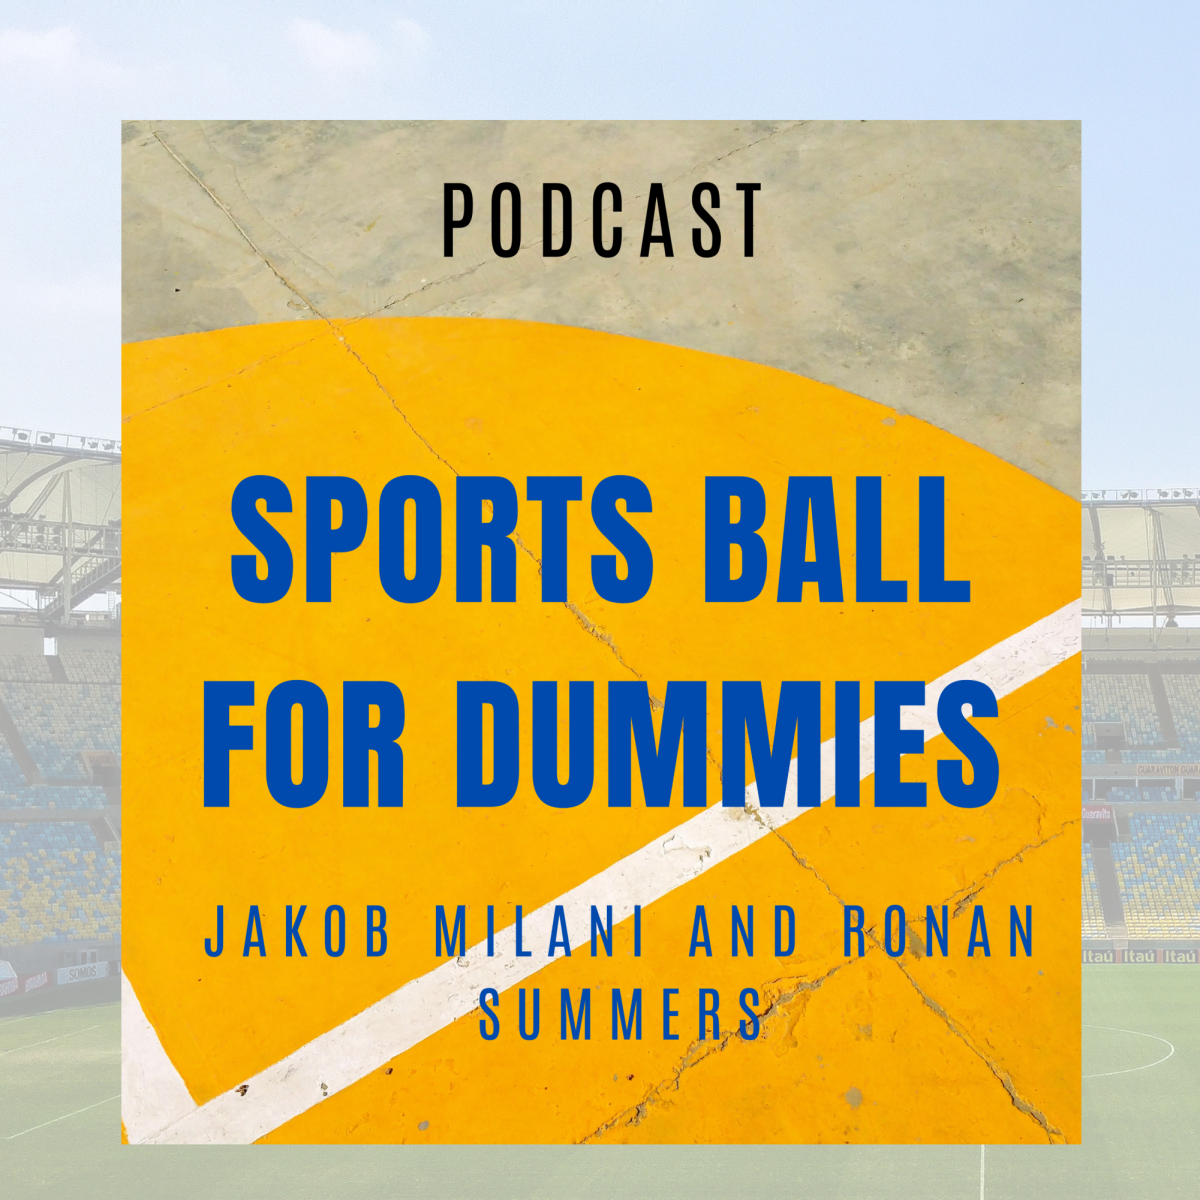 PODCAST: Sports Ball for Dummies, Ep. 3